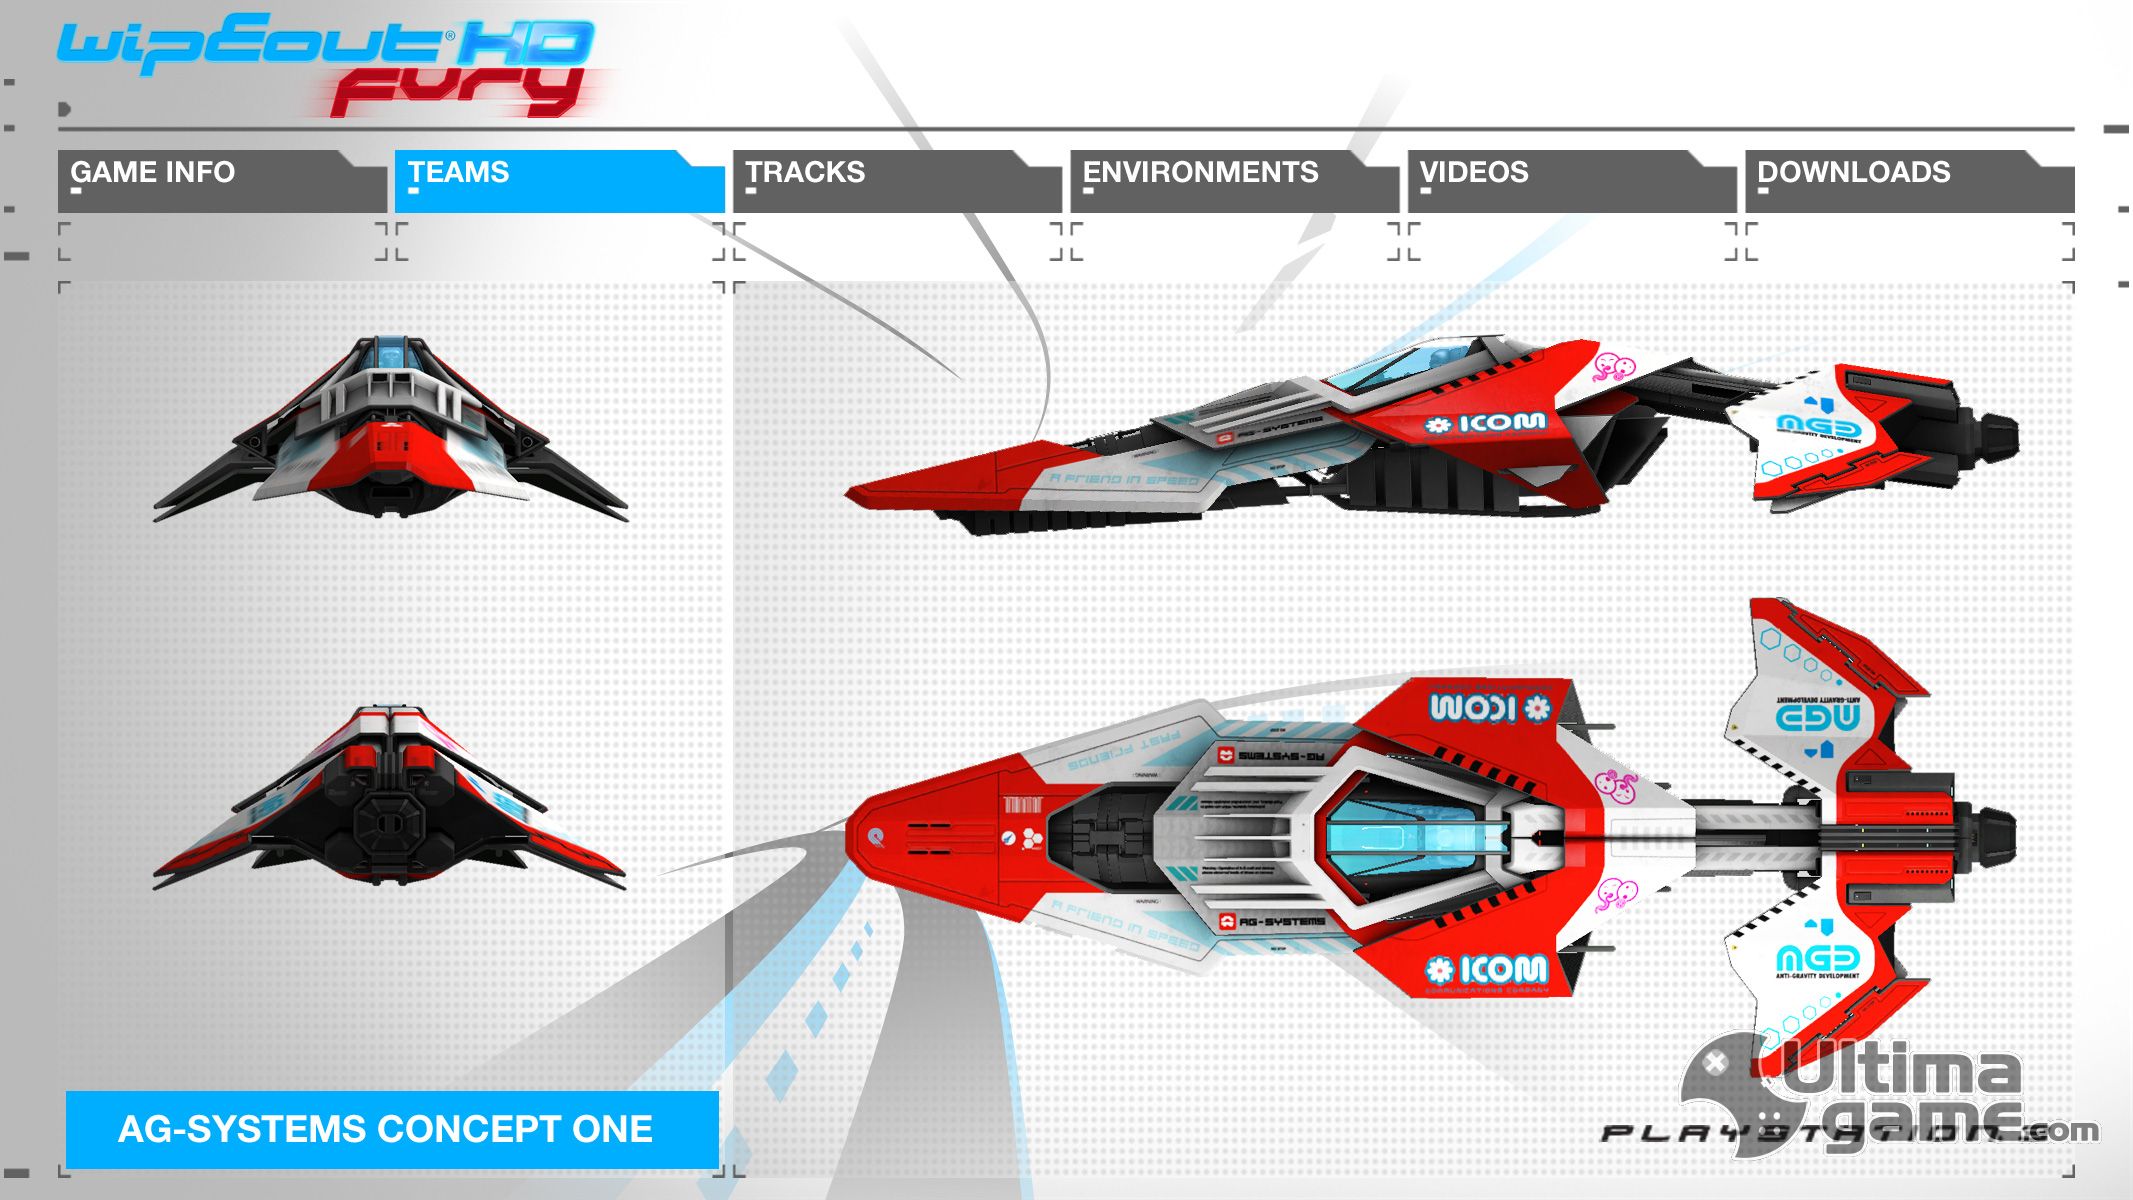 wipeout hd fury fx pack